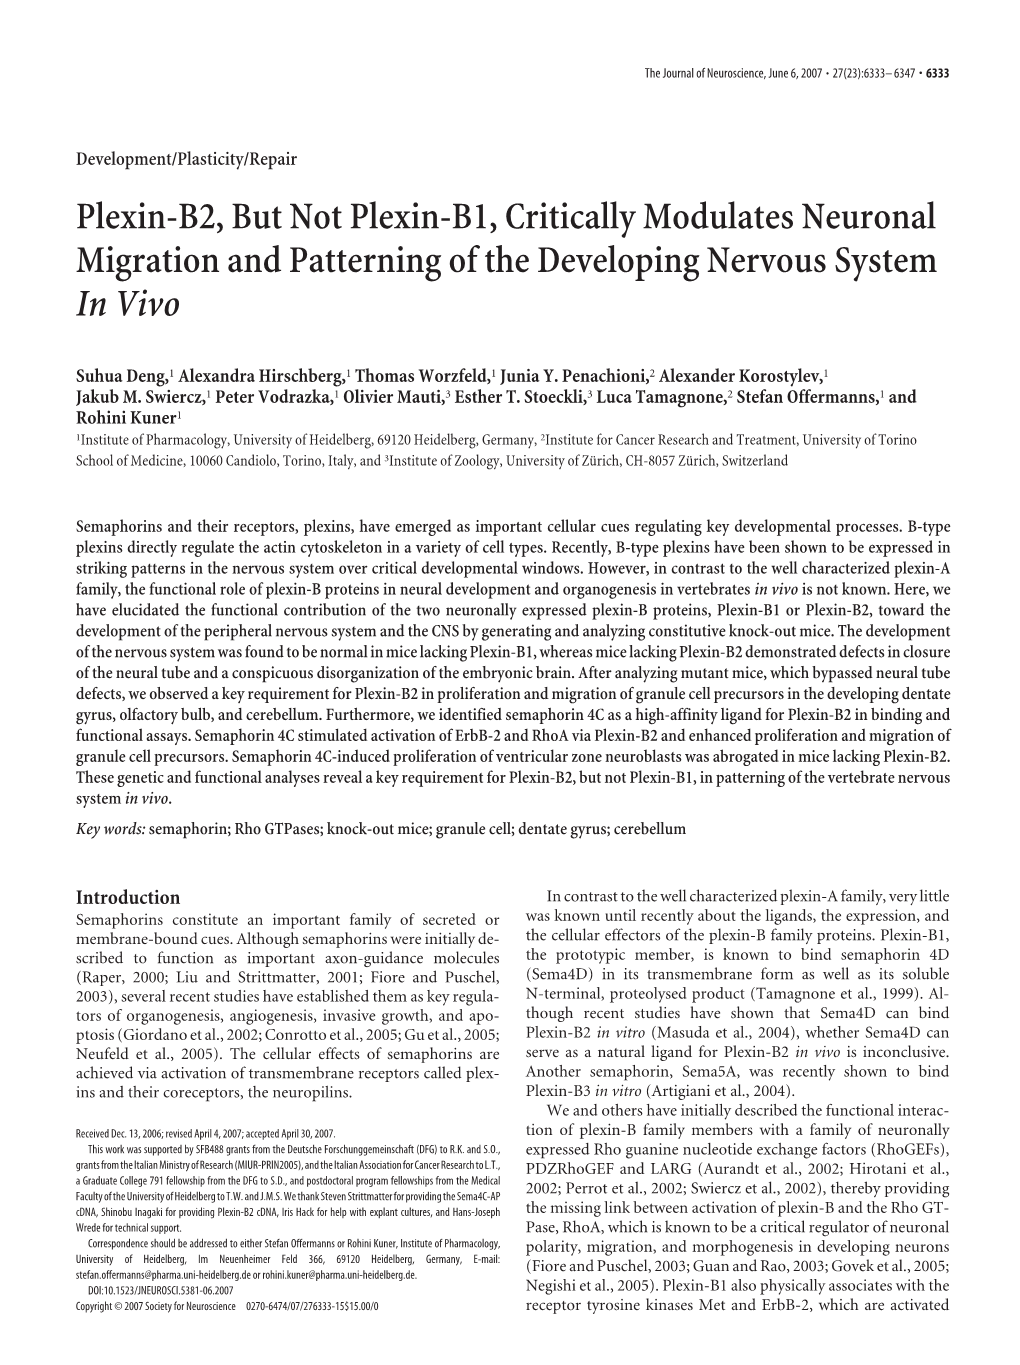 Plexin-B2, but Not Plexin-B1, Critically Modulates Neuronal Migration and Patterning of the Developing Nervous System in Vivo